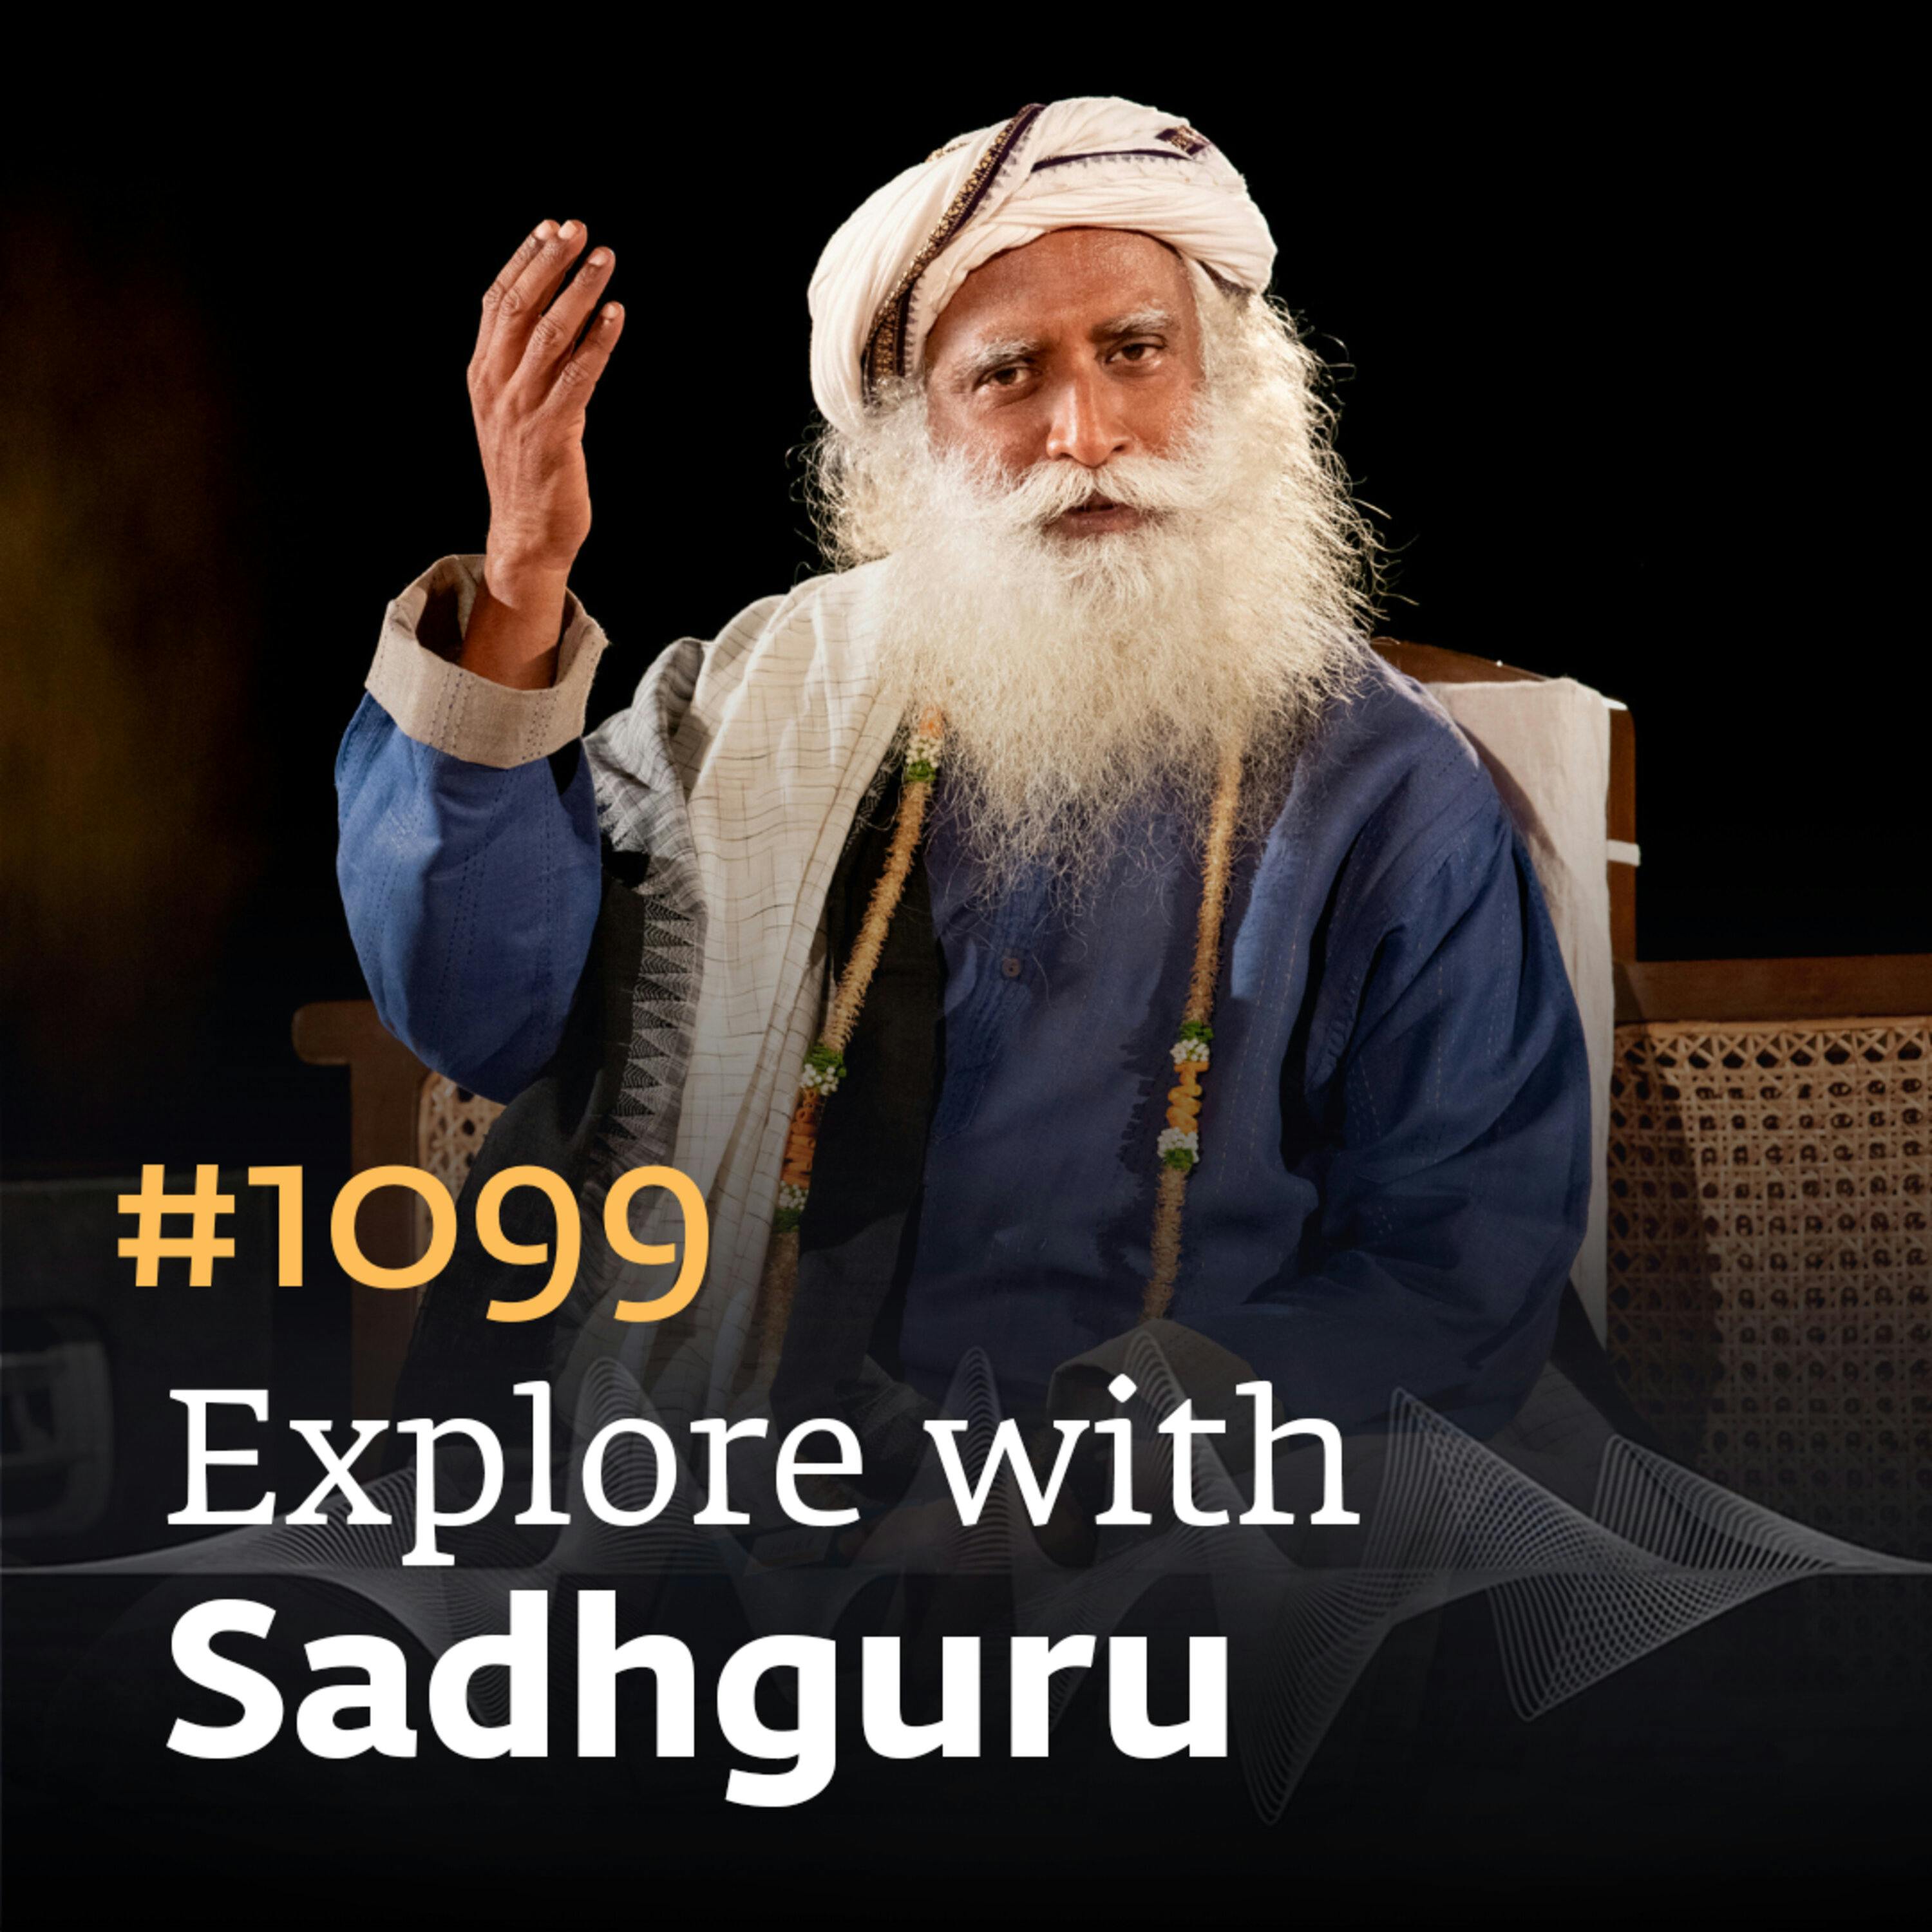 #1099 - New Year Special - A Powerful Insight for an Exuberant New Year